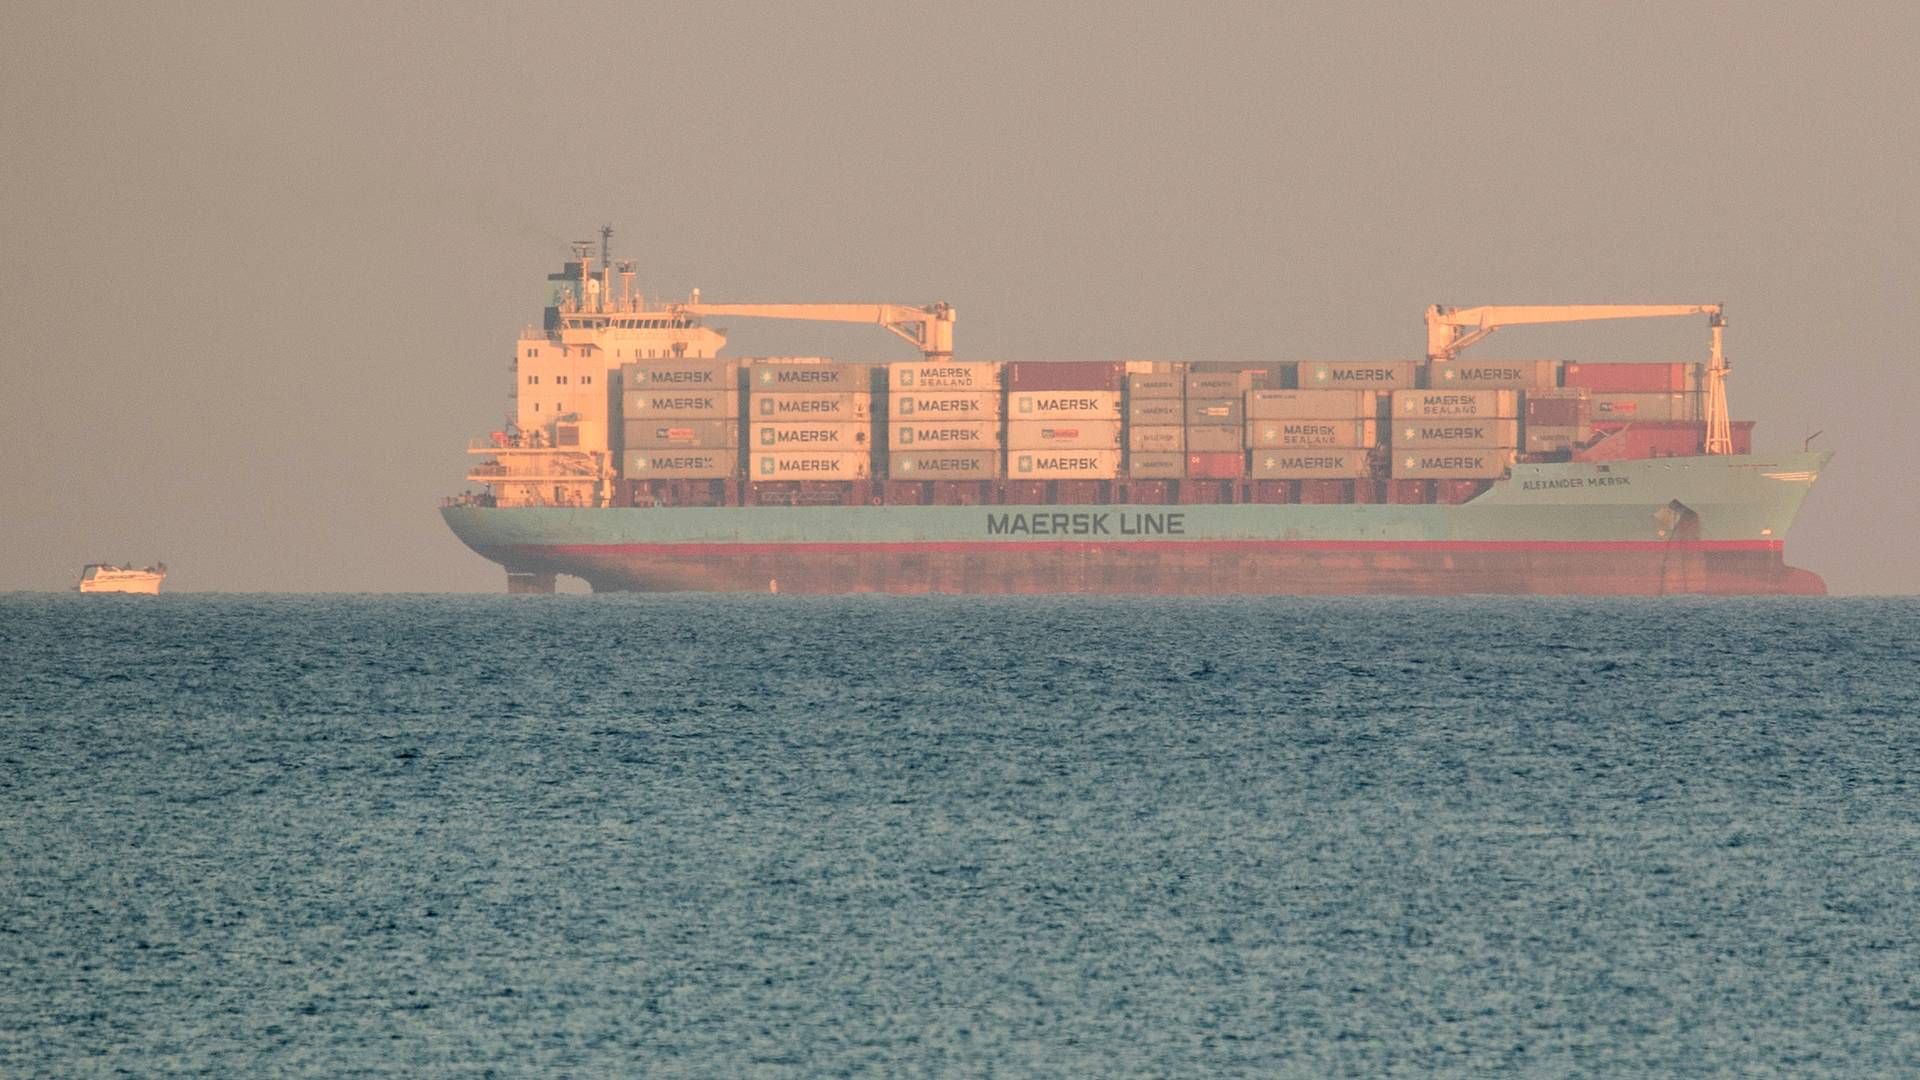 A Maersk container ship, albeit not one of the two that will have their sailing schedules changed due to the conflict in the Middle East.